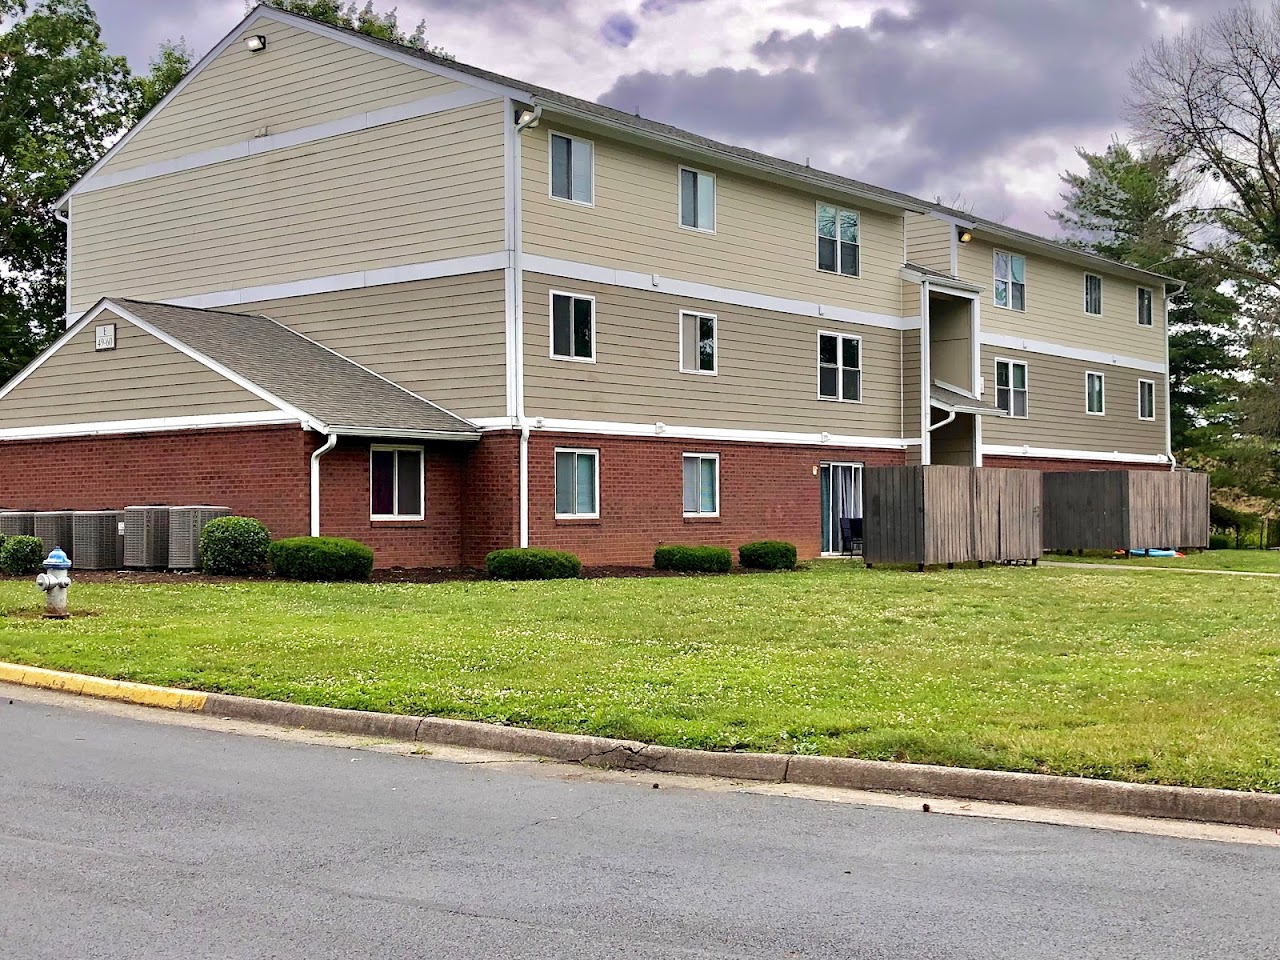 Photo of FERNCLIFF SOUTH. Affordable housing located at 3666 FERNCLIFF AVE NW ROANOKE, VA 24017